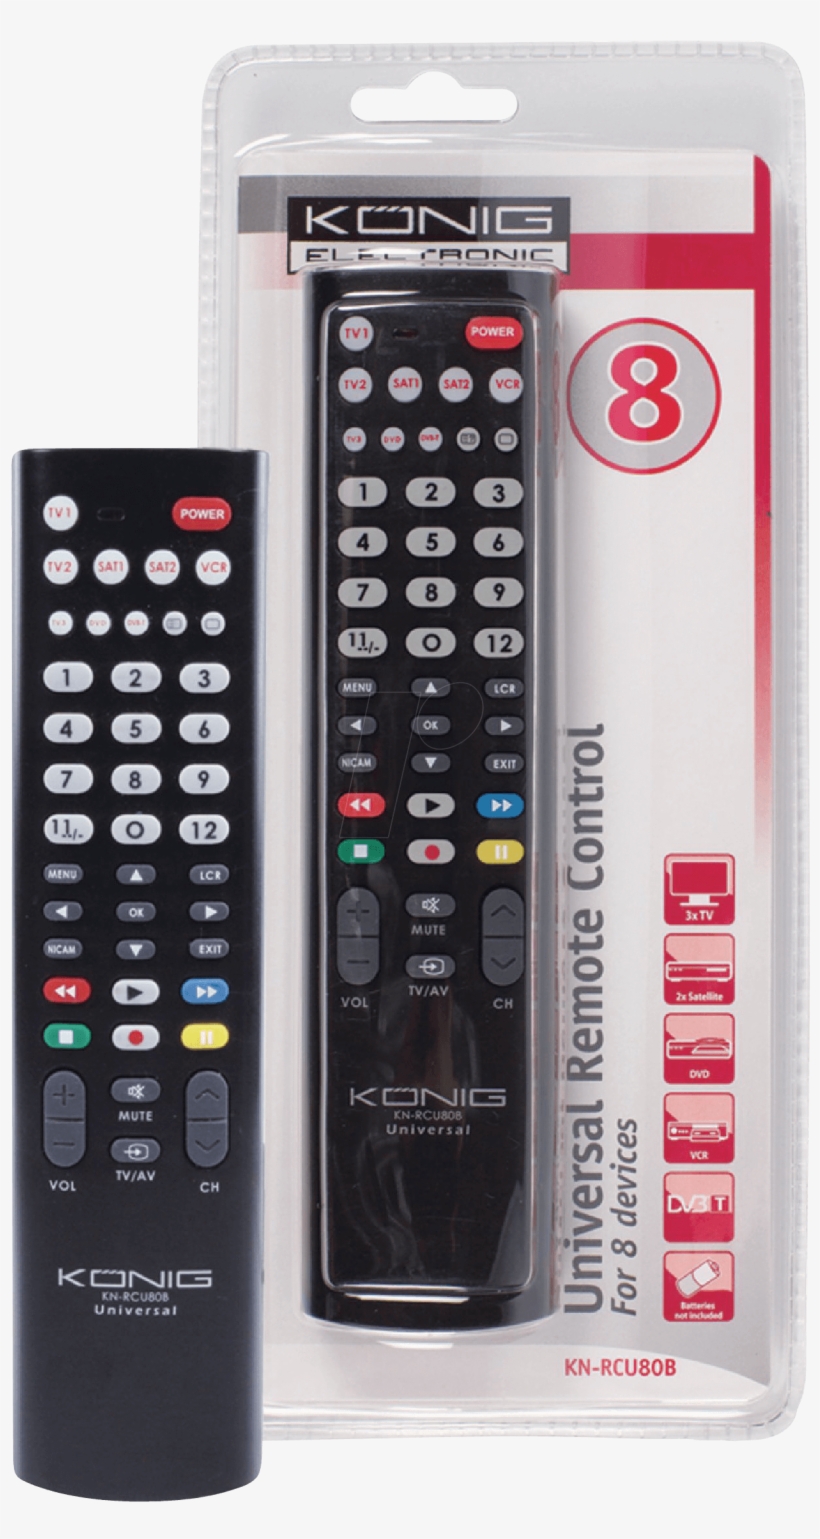 Universal Remote Control For 2 Devices König Kn-rcu80b - König Kn Rcu40b 4 1 Universal Remote, transparent png #8081931